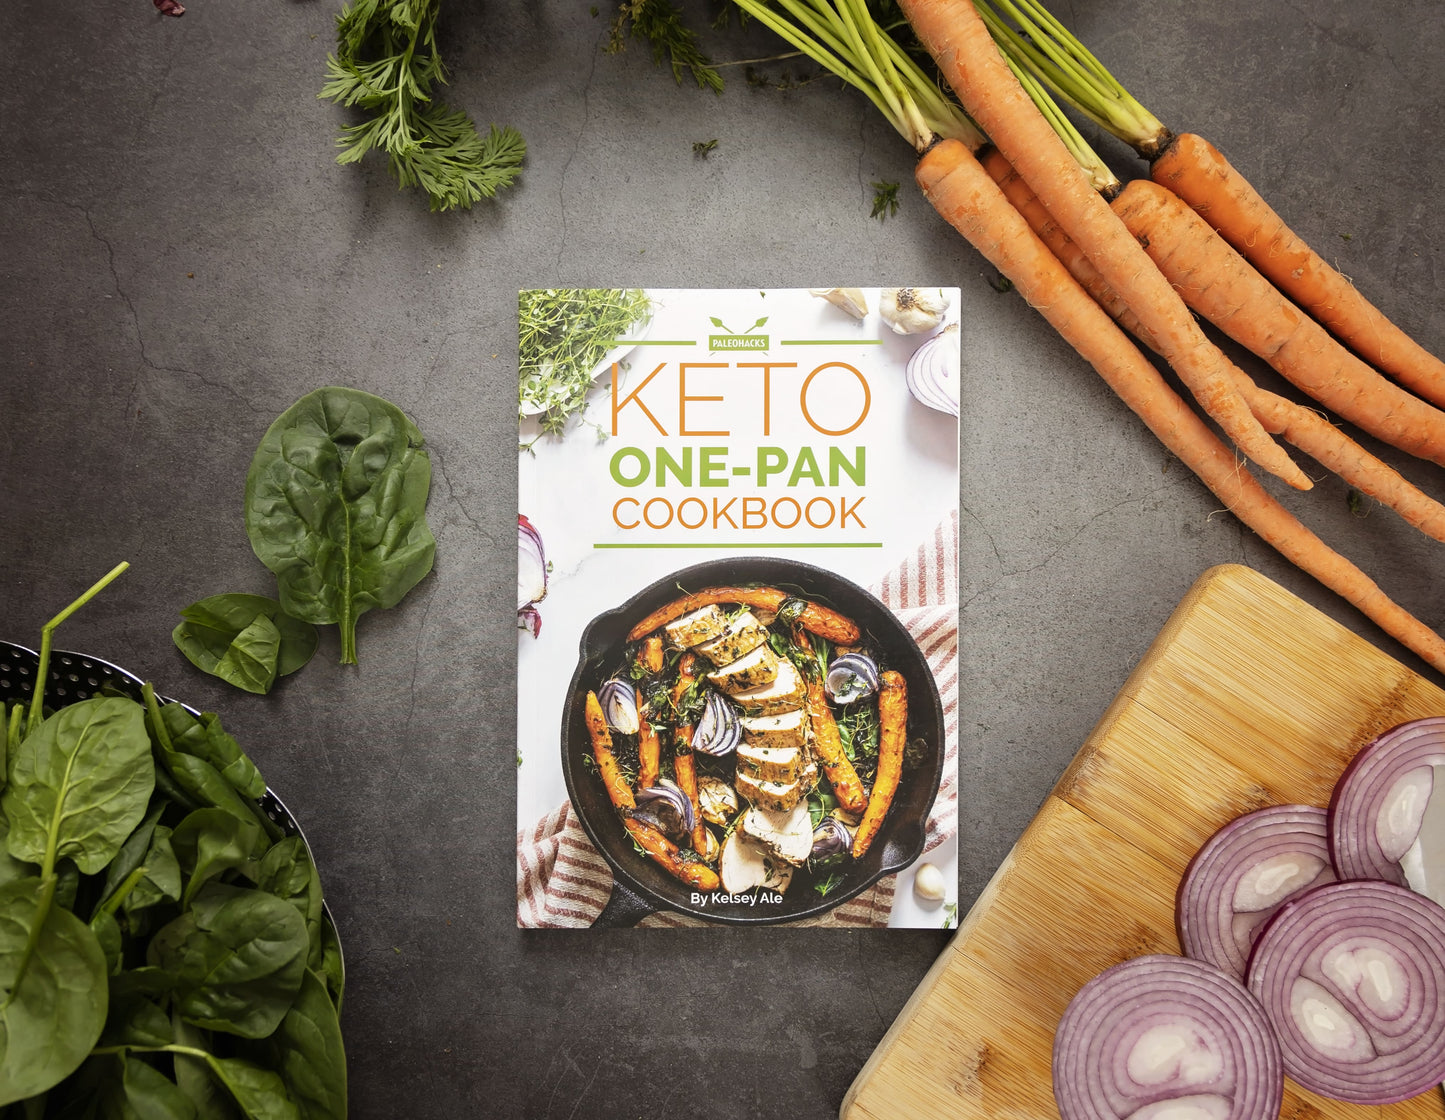 Keto One-Pan Cookbook laid on a grey, plain surface, surrounded by vegetables and sliced onions.